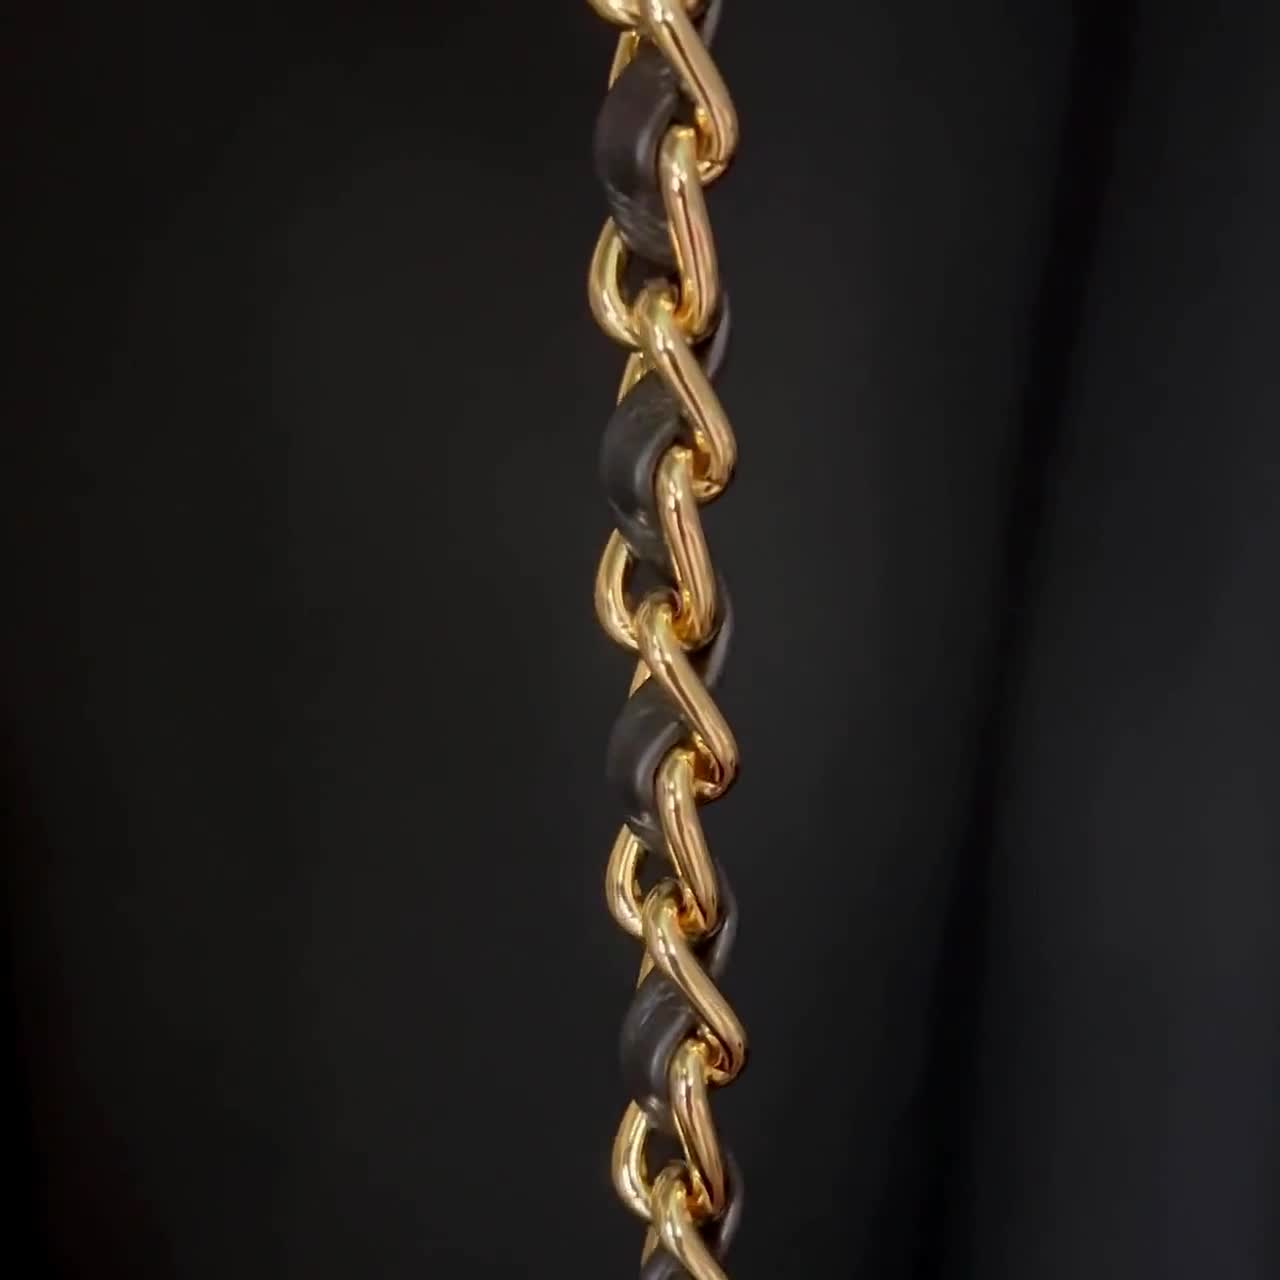 Classic GOLD Chain Bag Strap with Leather Weaved Through - Choice